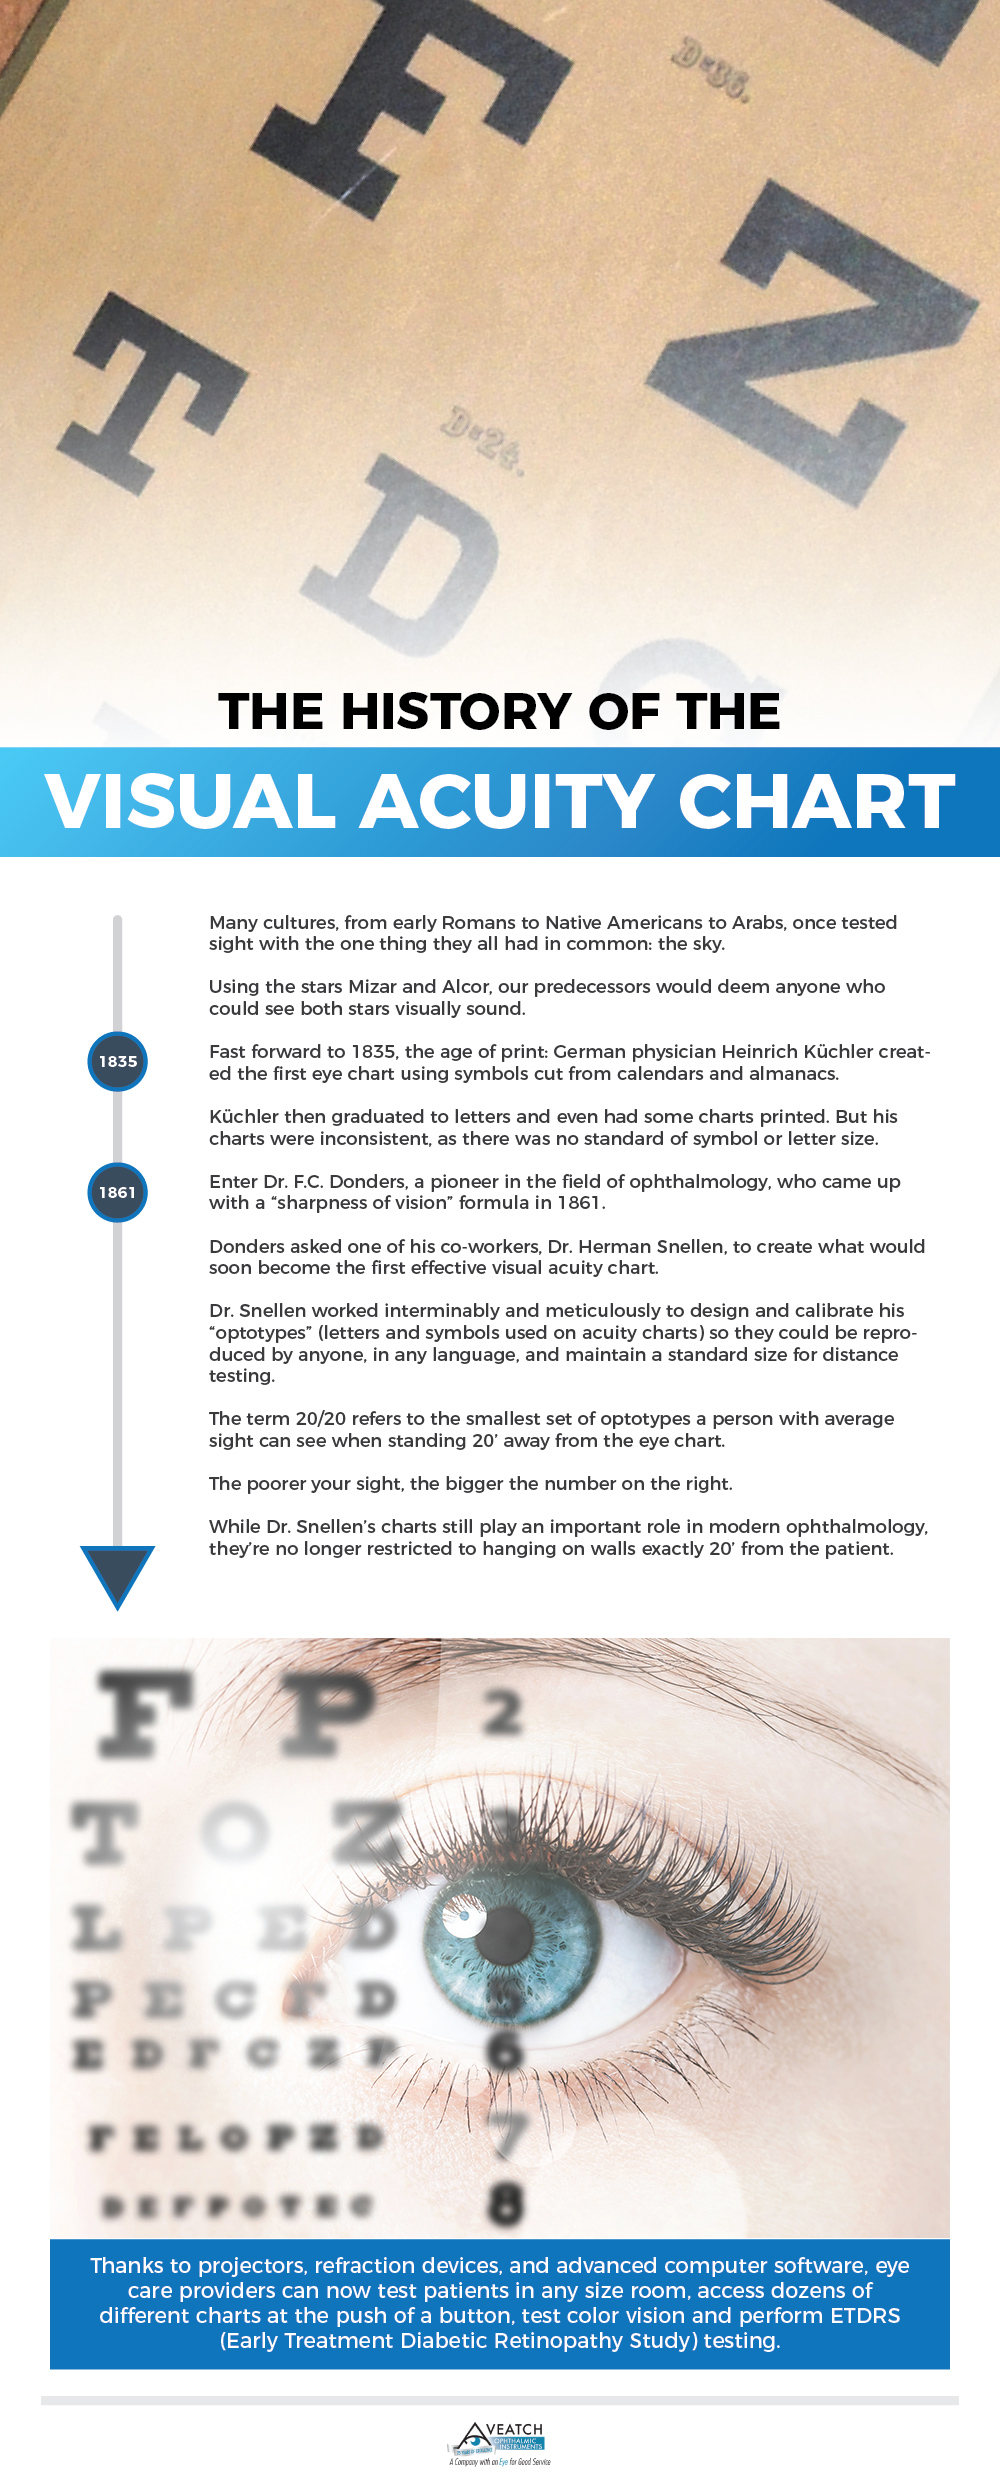 https://www.veatchinstruments.com/images/about-visual-acuity/107735_Visual-Acuity-Charts_080417.jpg